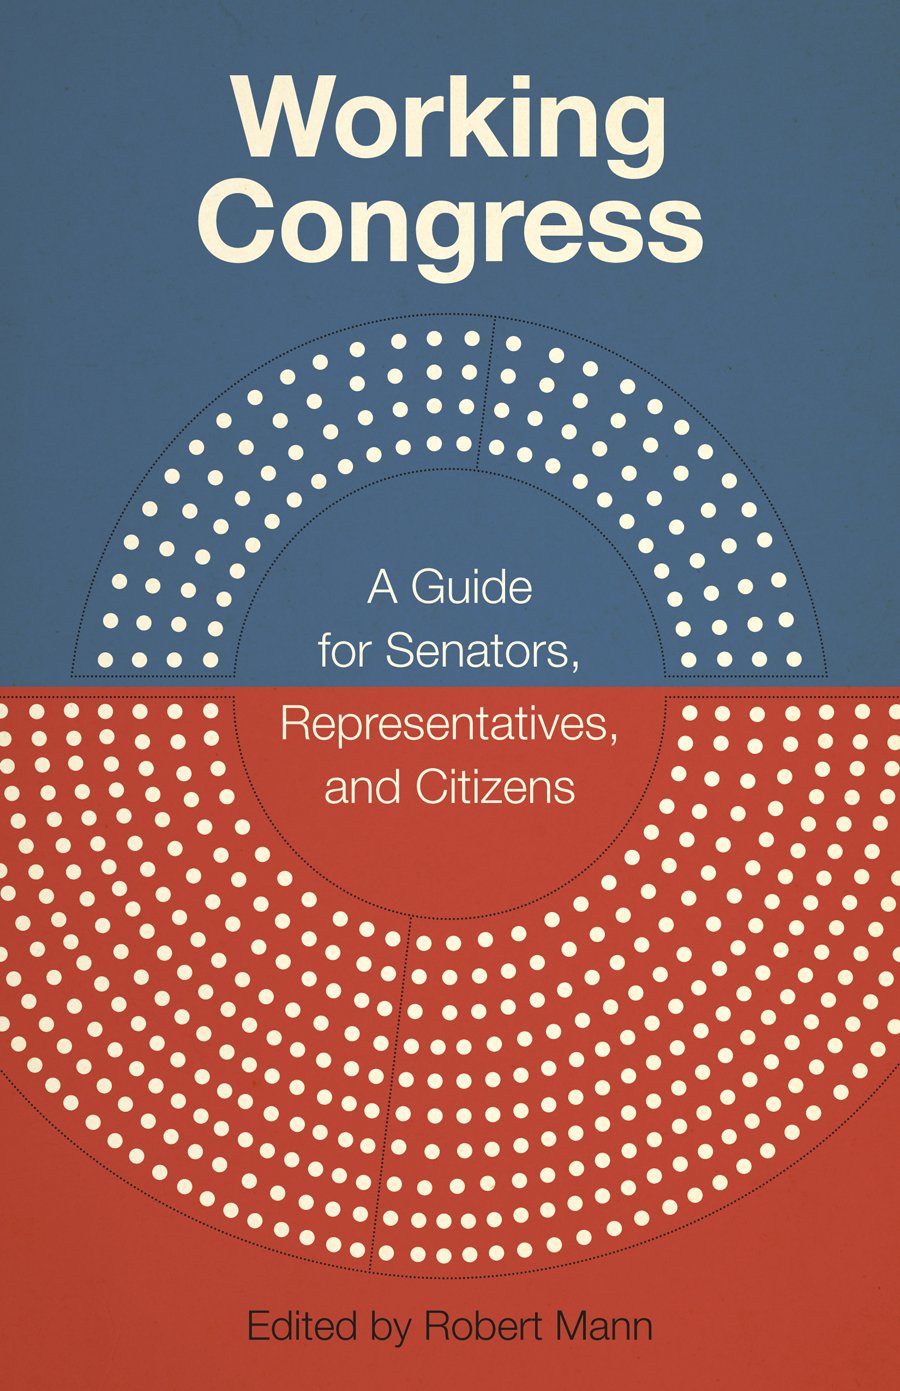 "Working Congress" book cover 